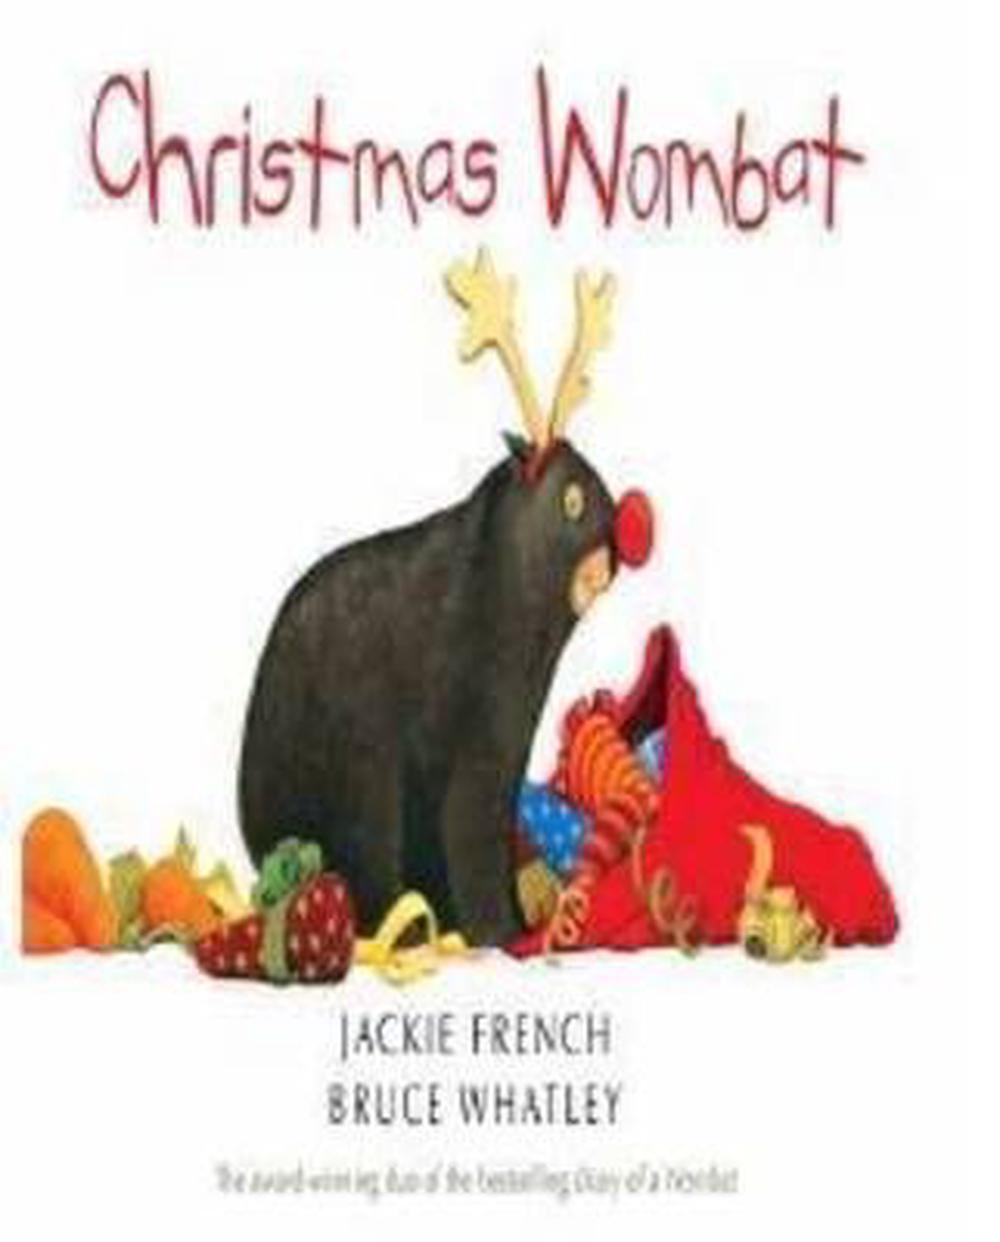 diary of a christmas wombat